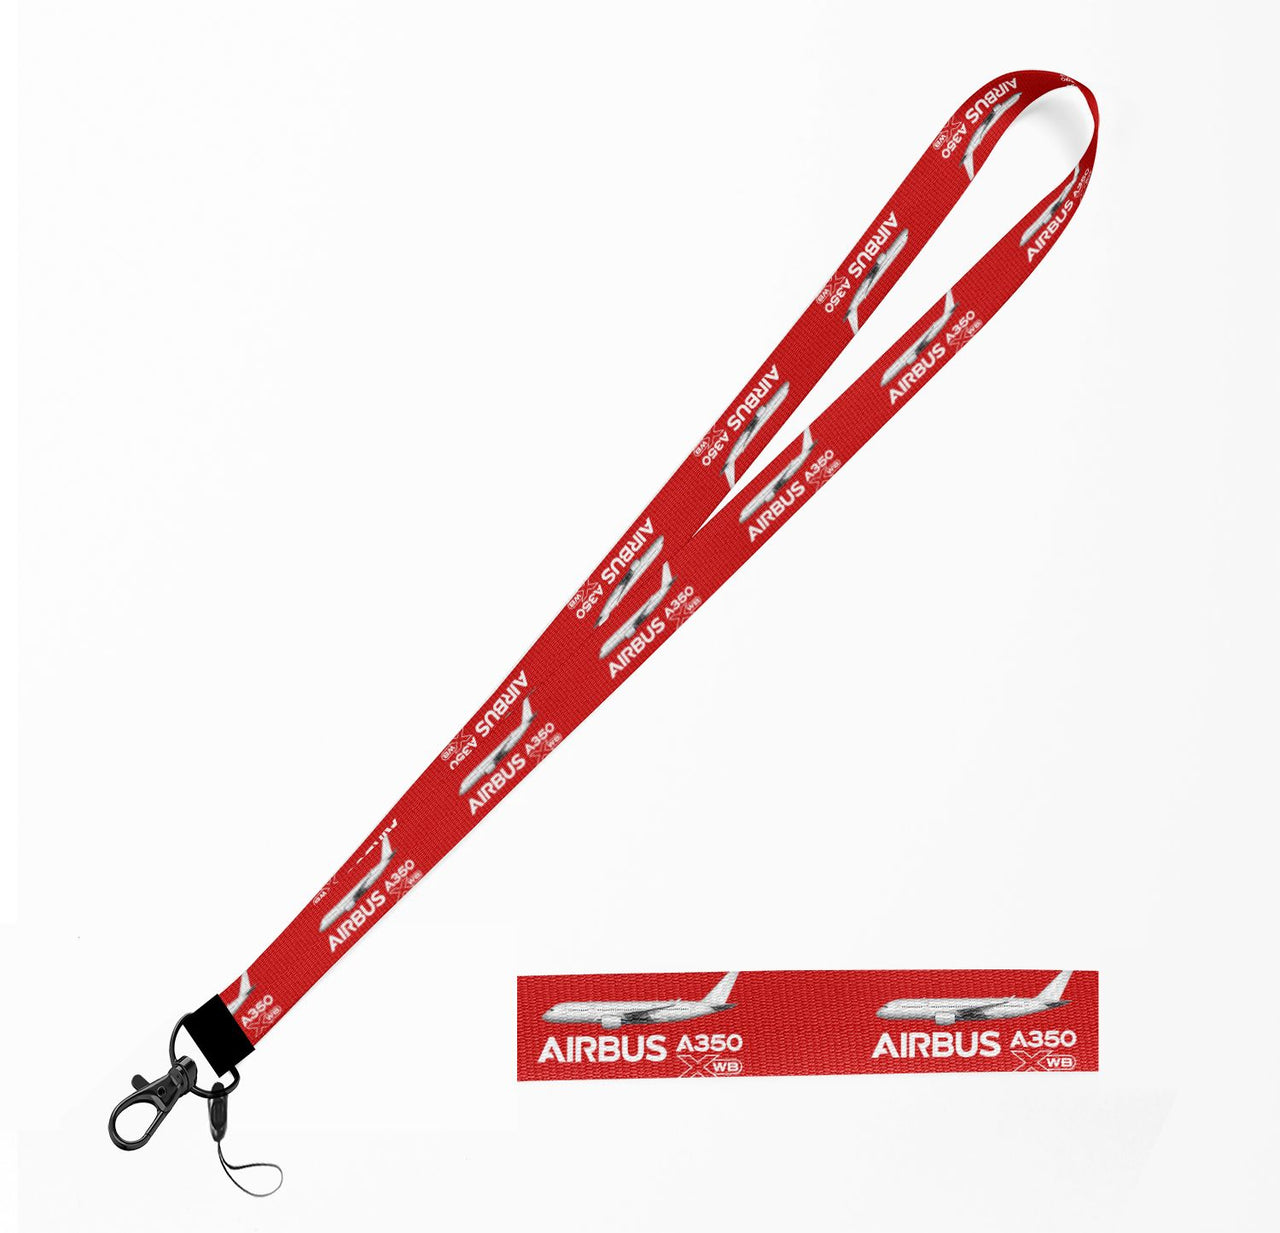 The Airbus A350 WXB Designed Lanyard & ID Holders